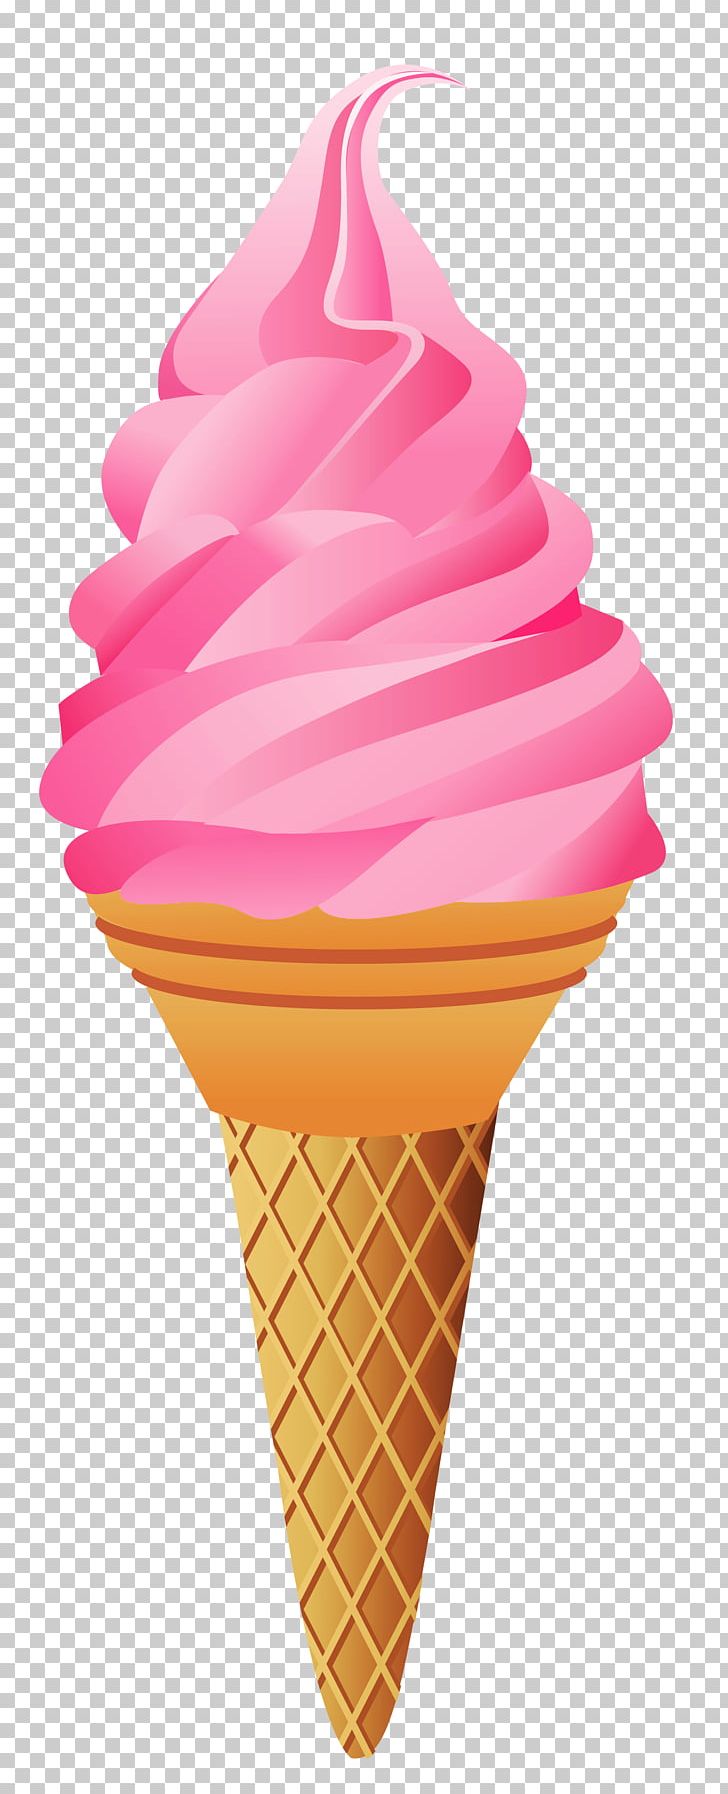 Ice Cream Cones Chocolate Ice Cream Sundae PNG, Clipart, Cake, Chocolate, Chocolate Ice Cream, Cream, Dairy Product Free PNG Download